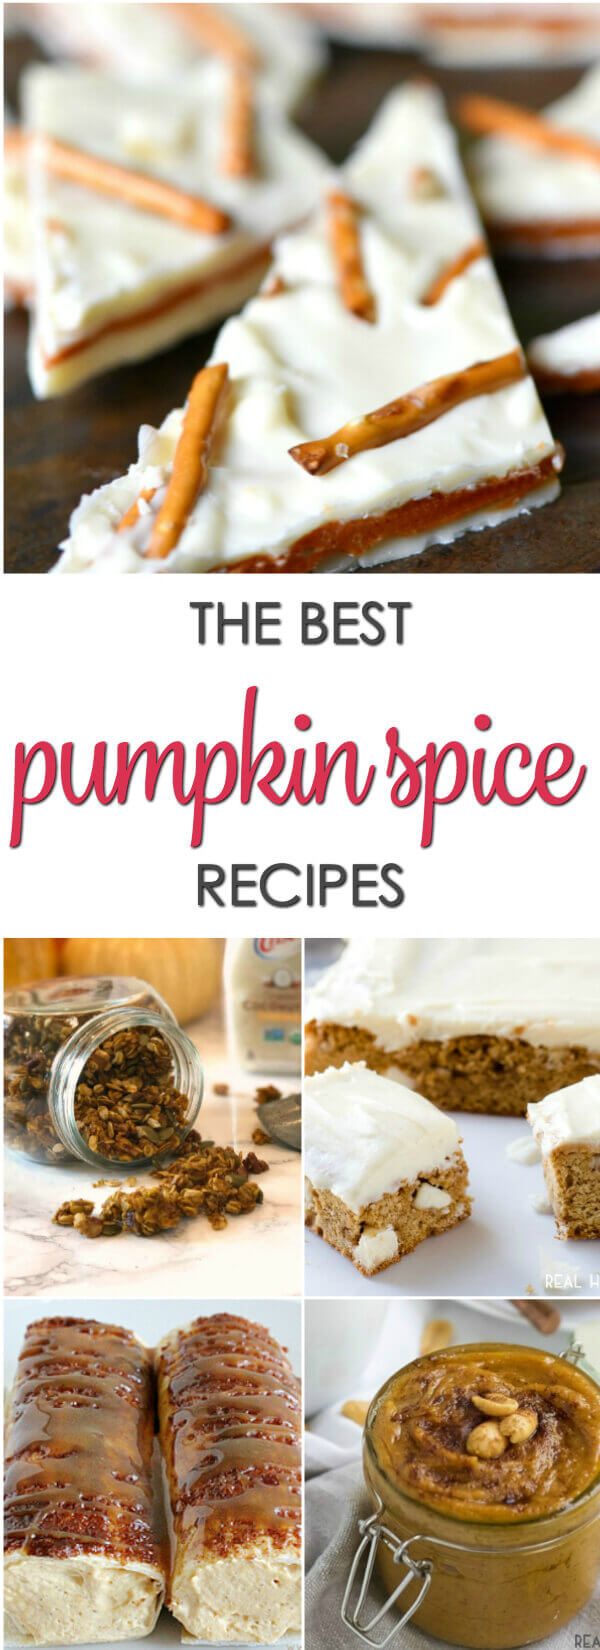 The BEST Pumpkin Spice Recipes - the best sweet and savory pumpkin spice infused recipes from across the web